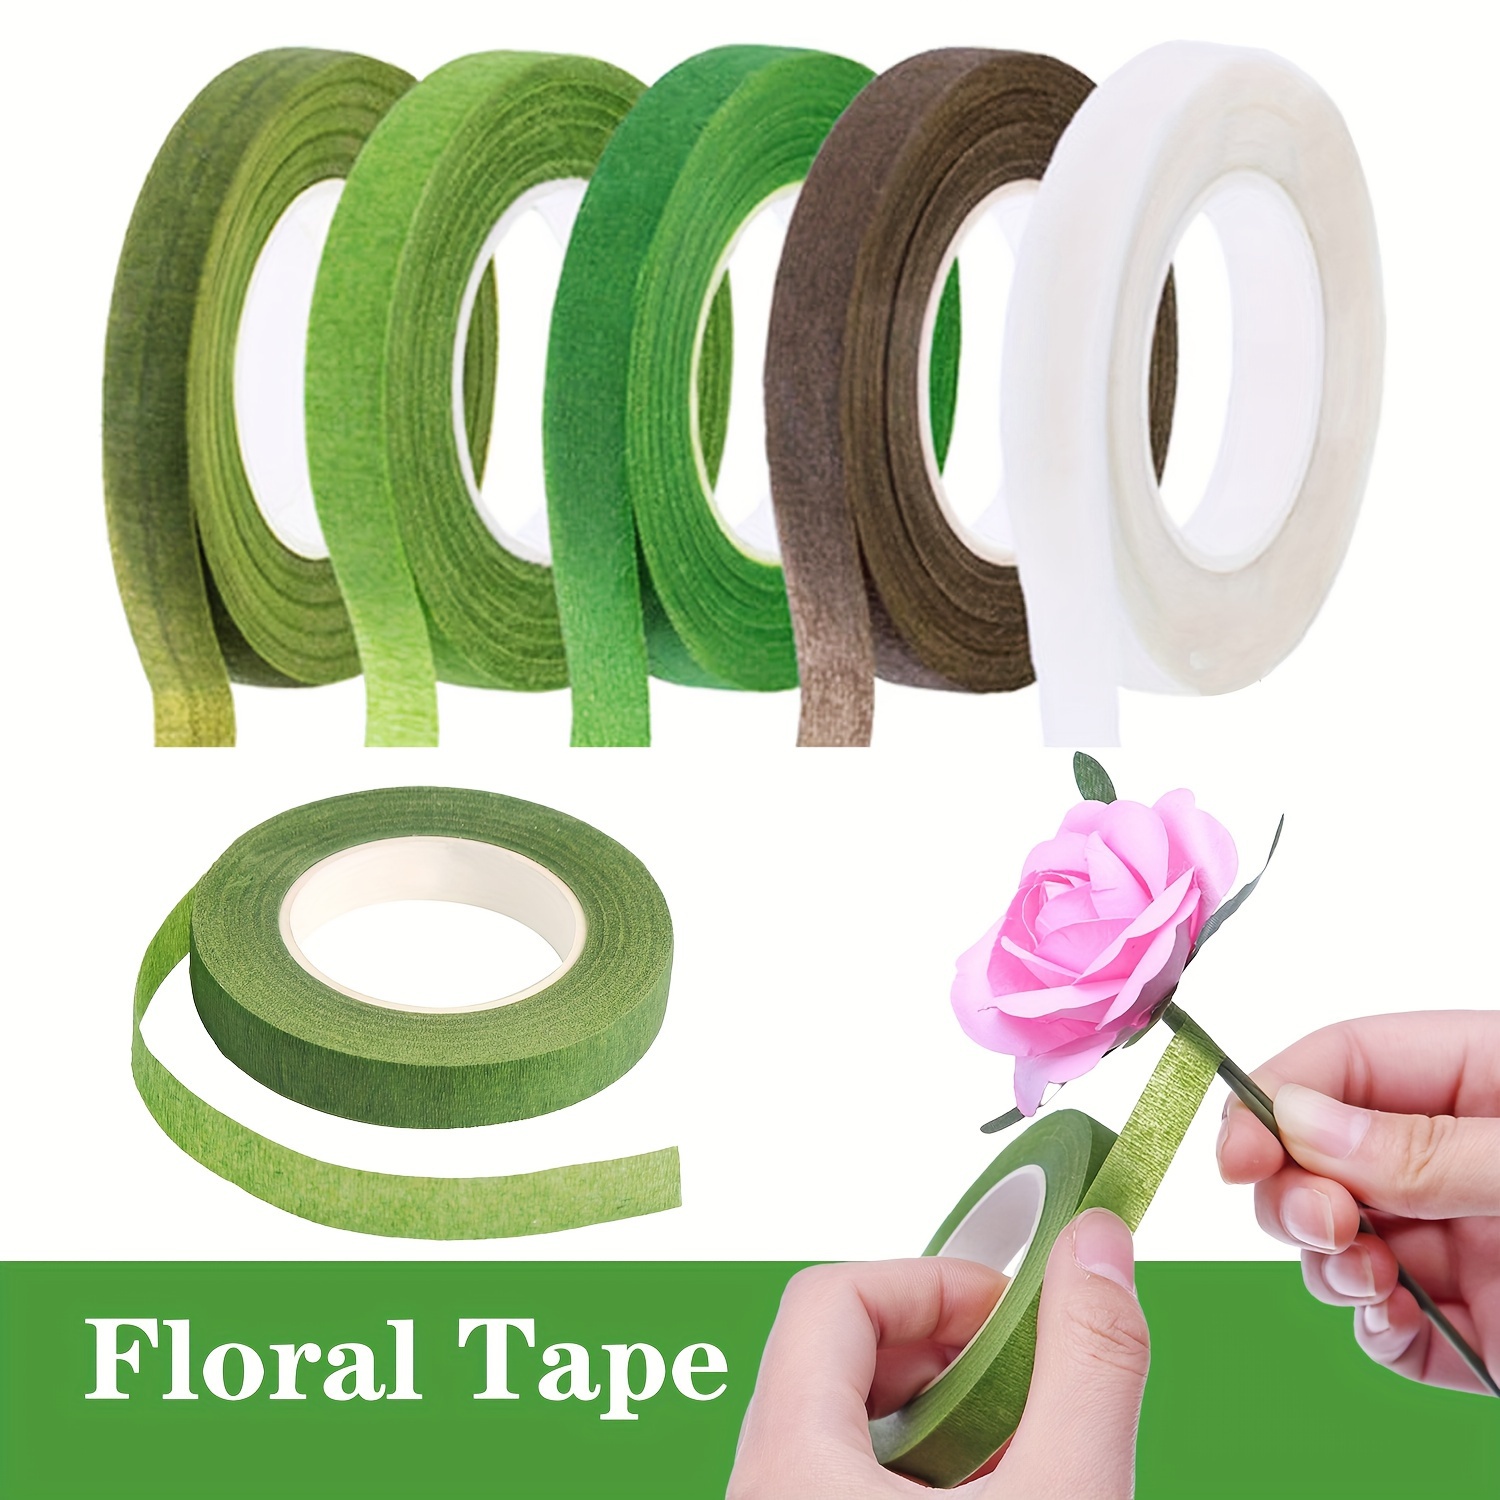 Tapes Garland Wreath Decorative Paper Floral Tape For Artificial